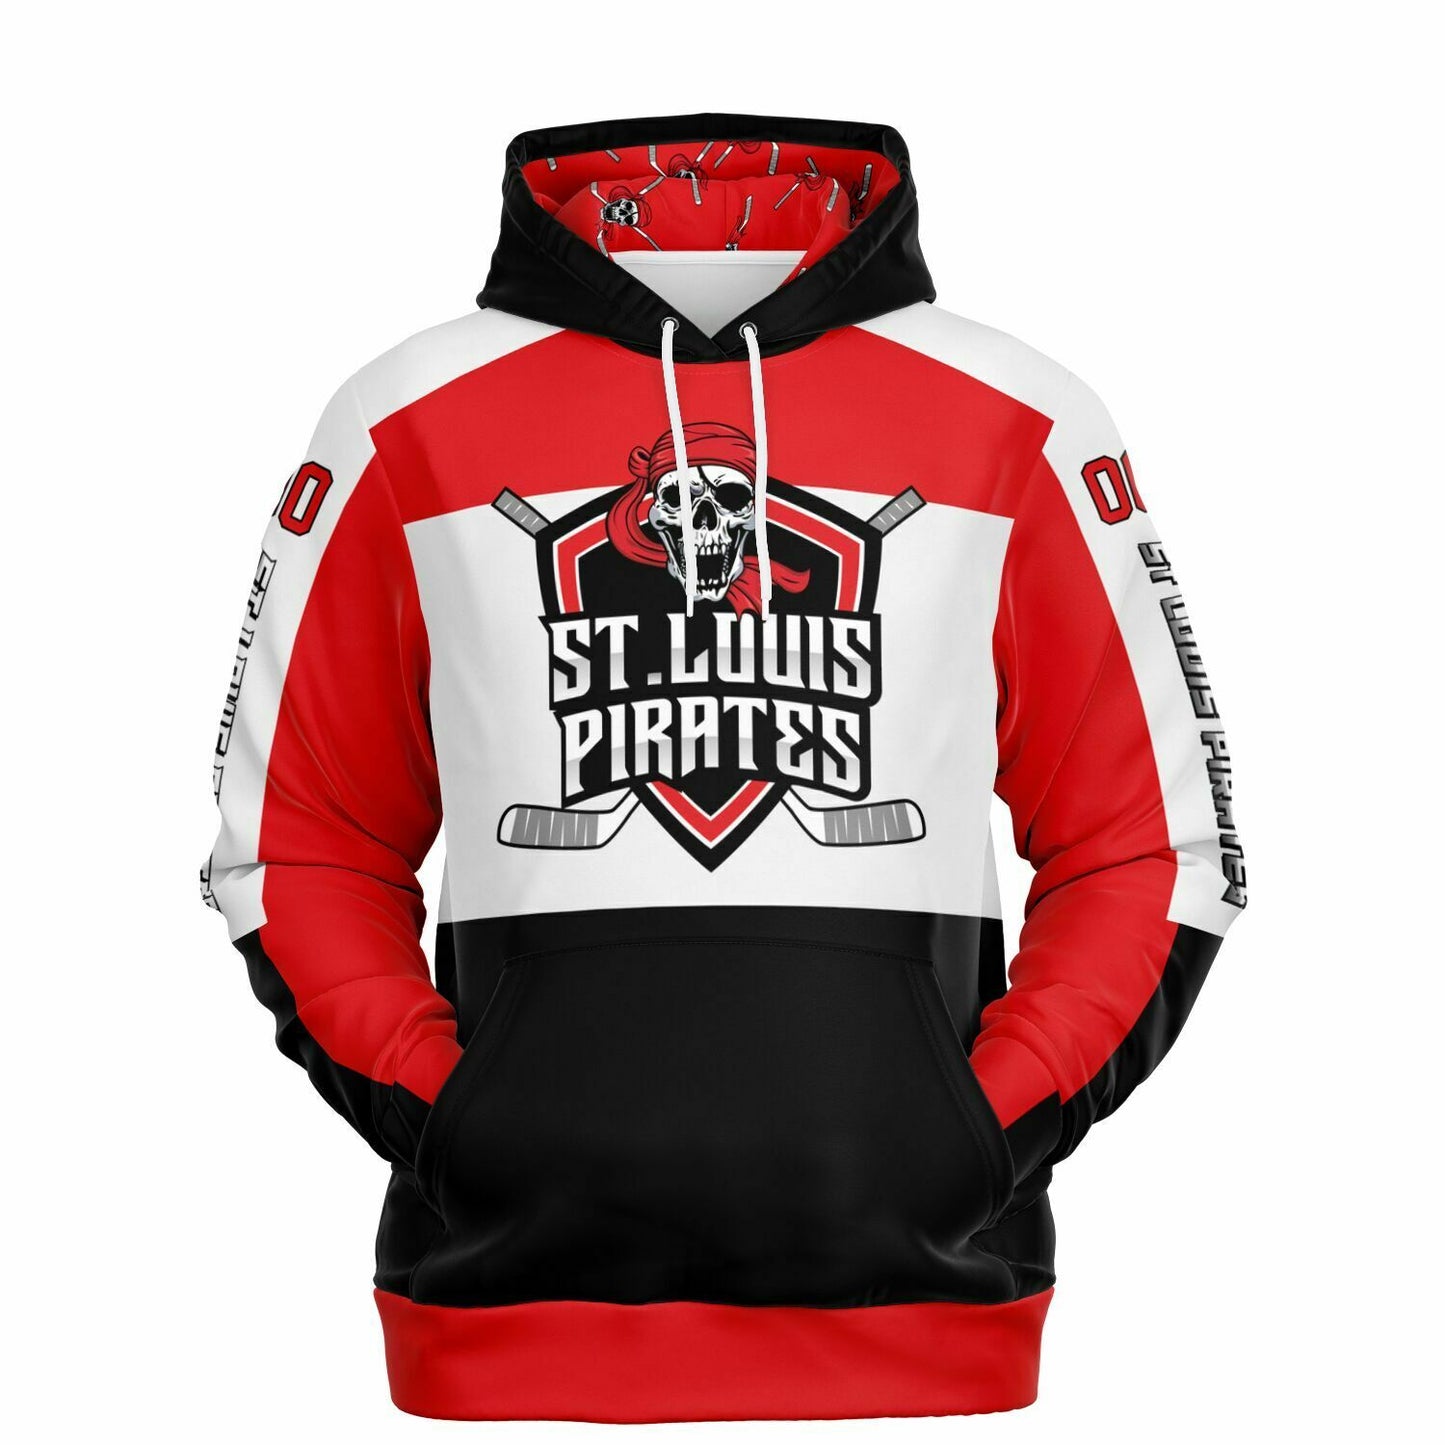 St Louis Pirates Customizable Athletic Hoodie